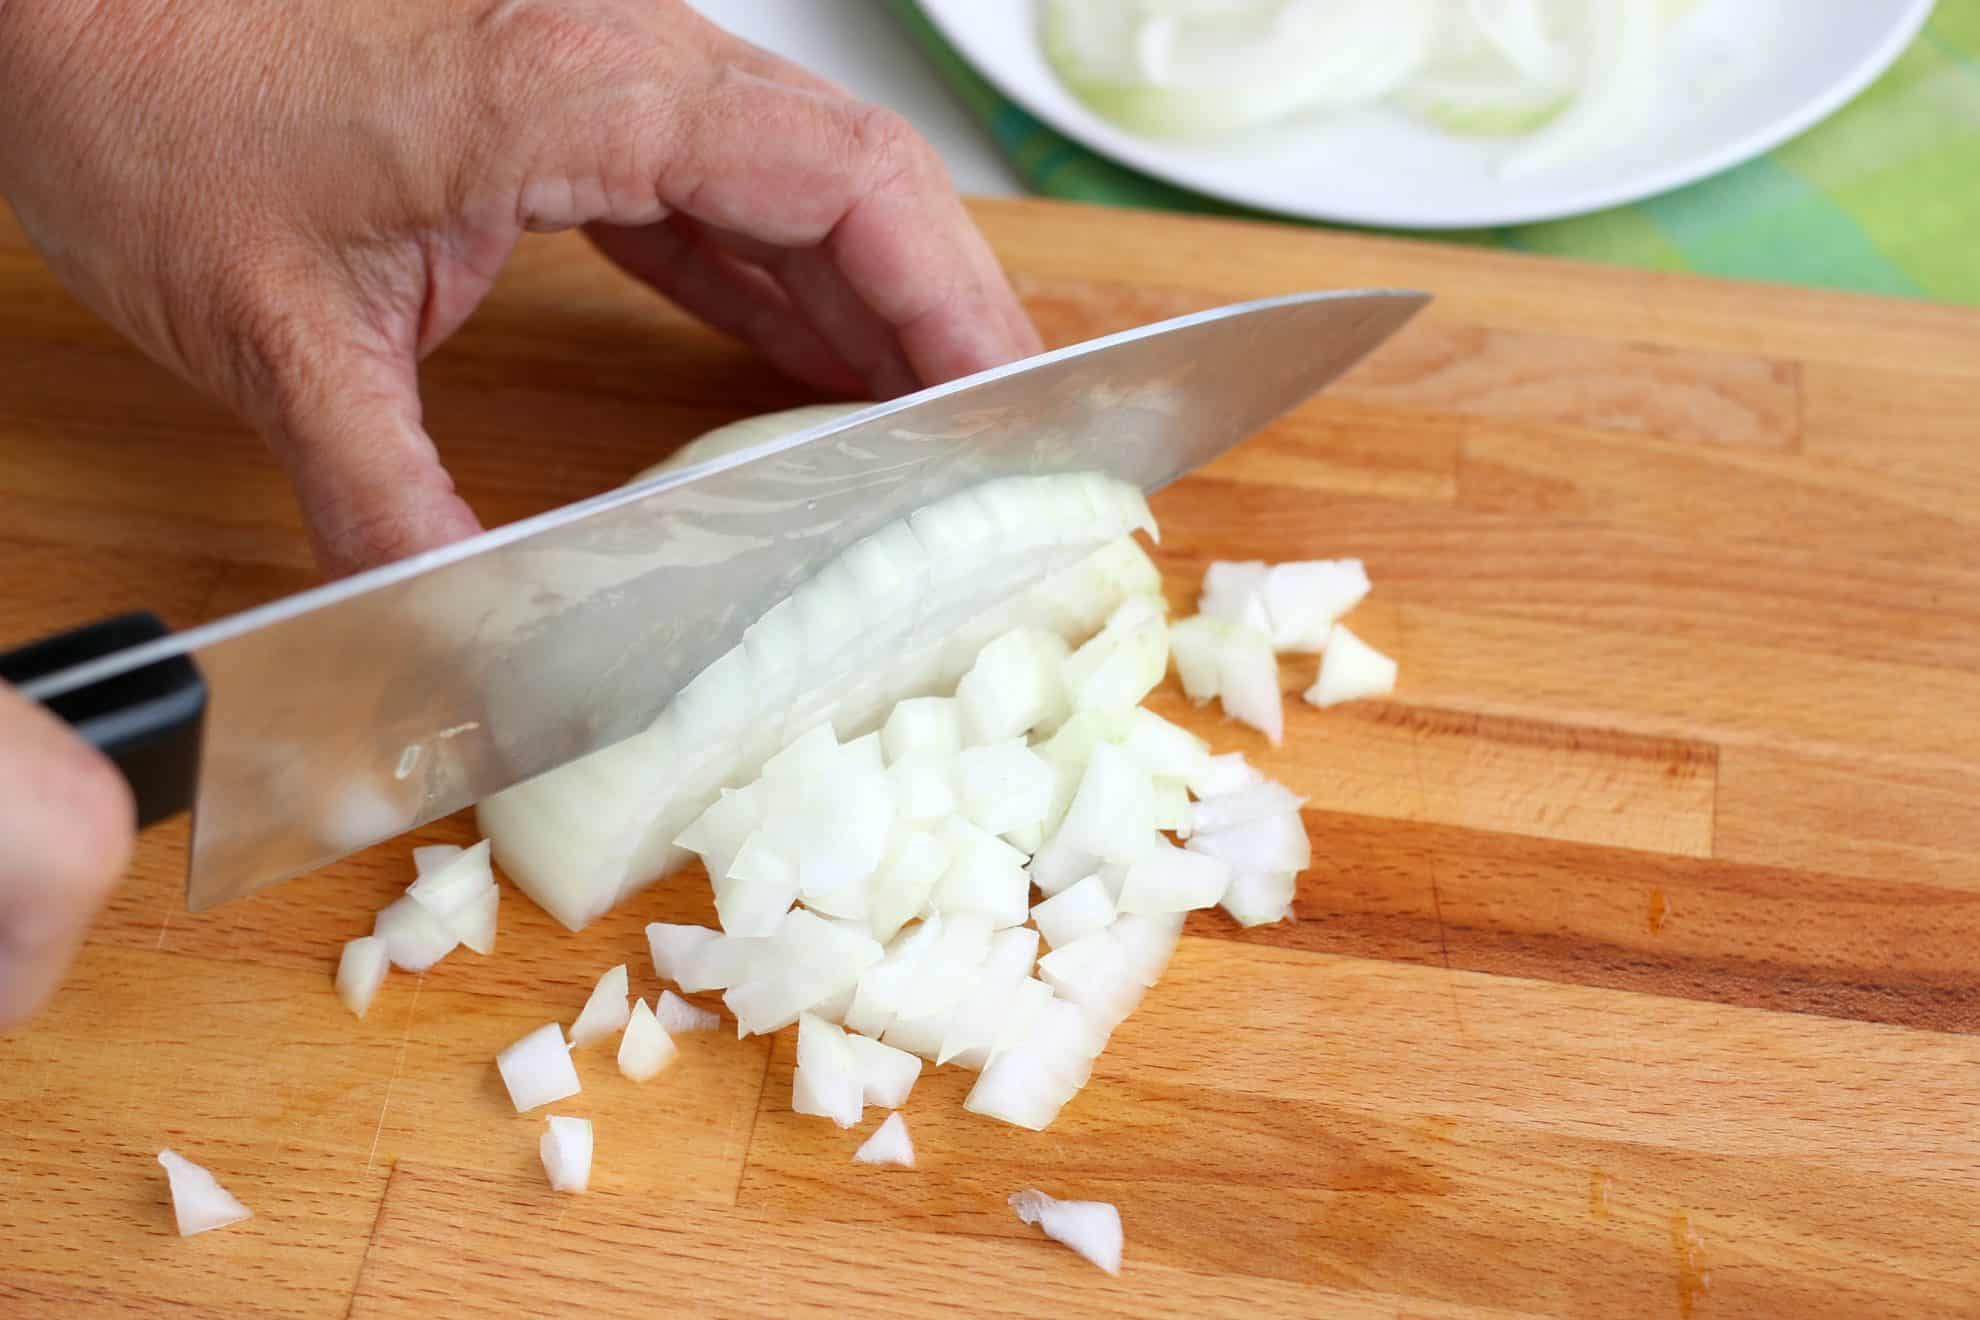 Slicing an onion in preparation of dicing.